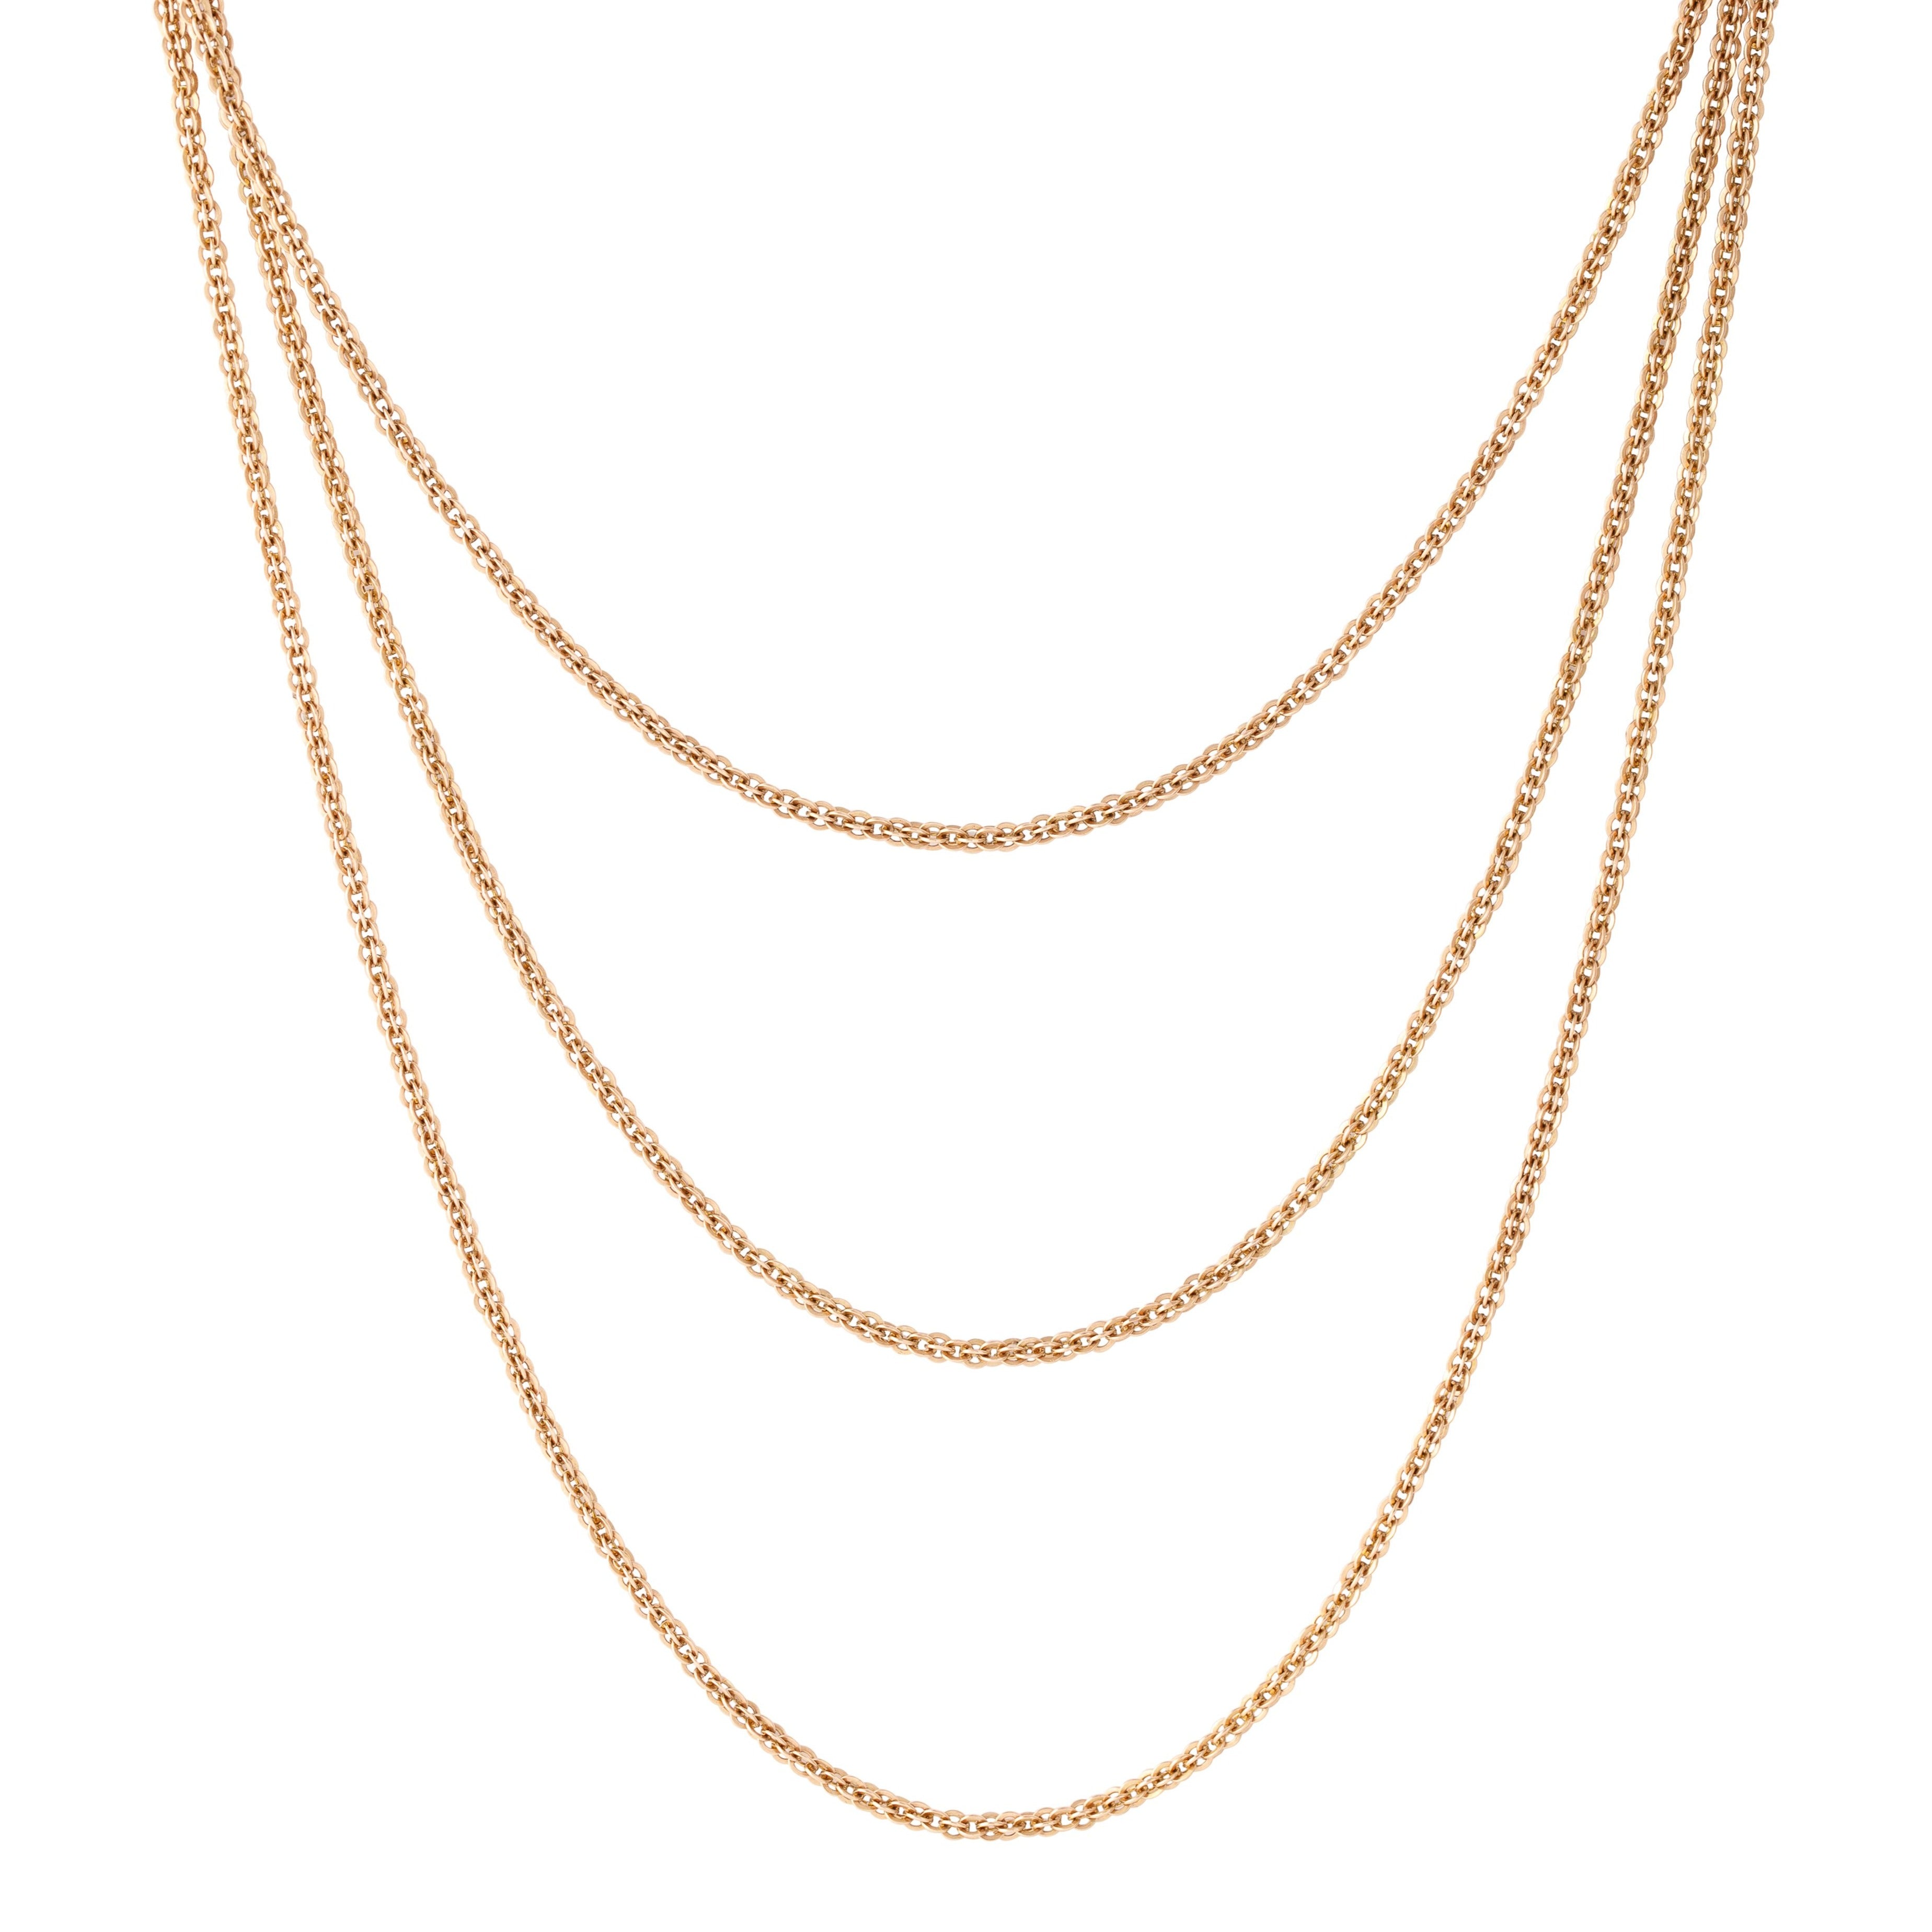 Extra Long 14k Gold 63" Chain Necklace